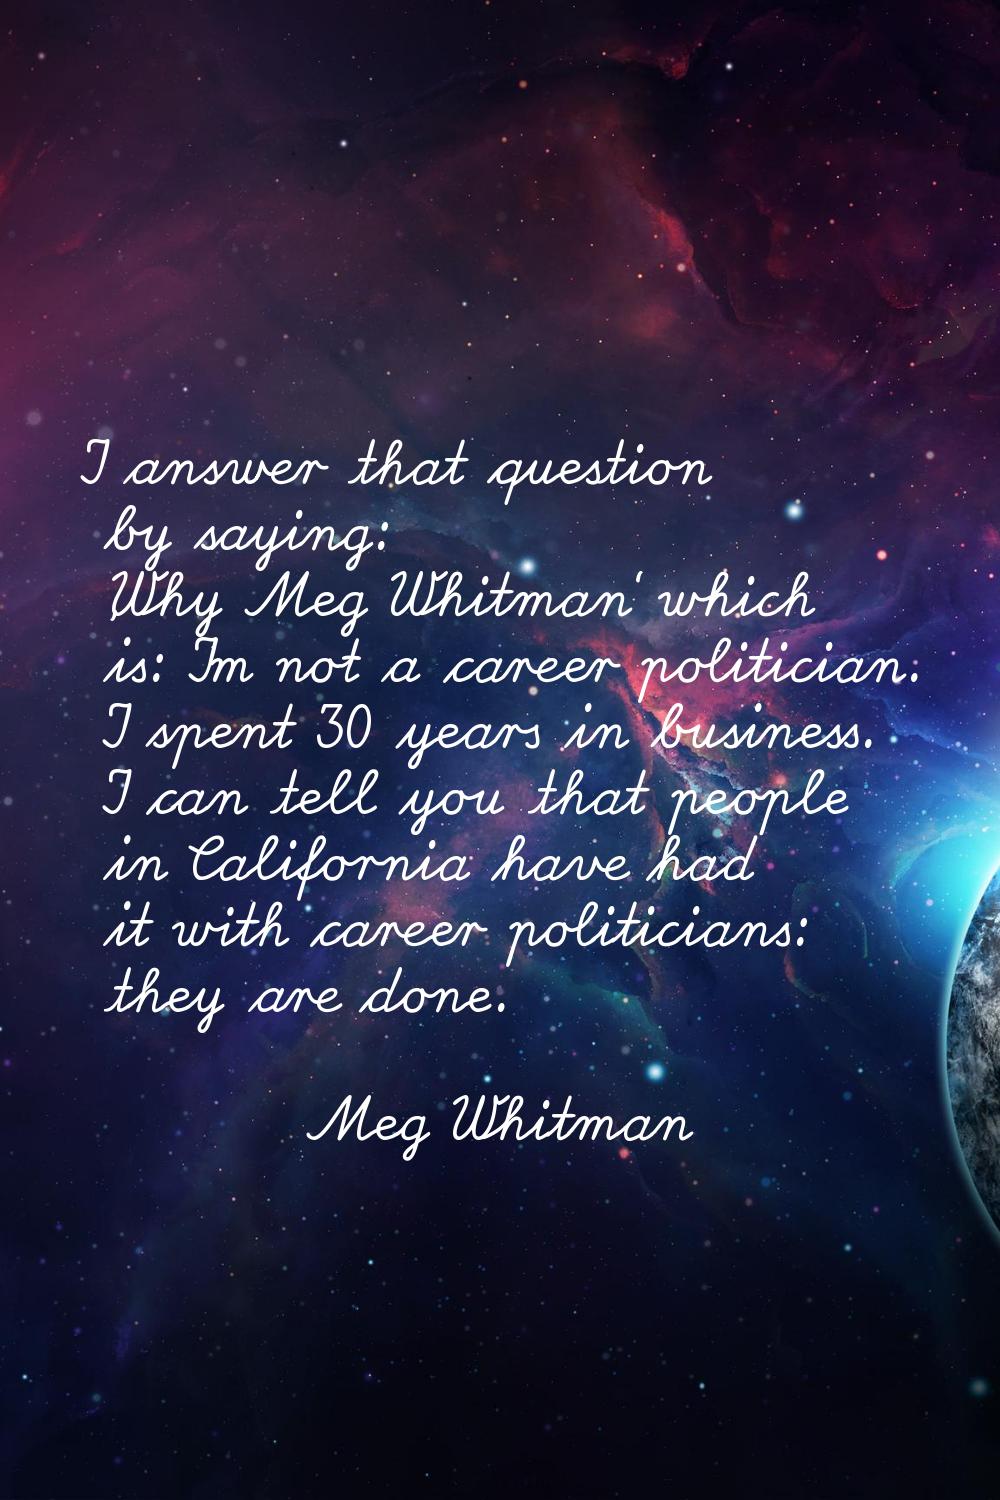 I answer that question by saying: 'Why Meg Whitman' which is: I'm not a career politician. I spent 